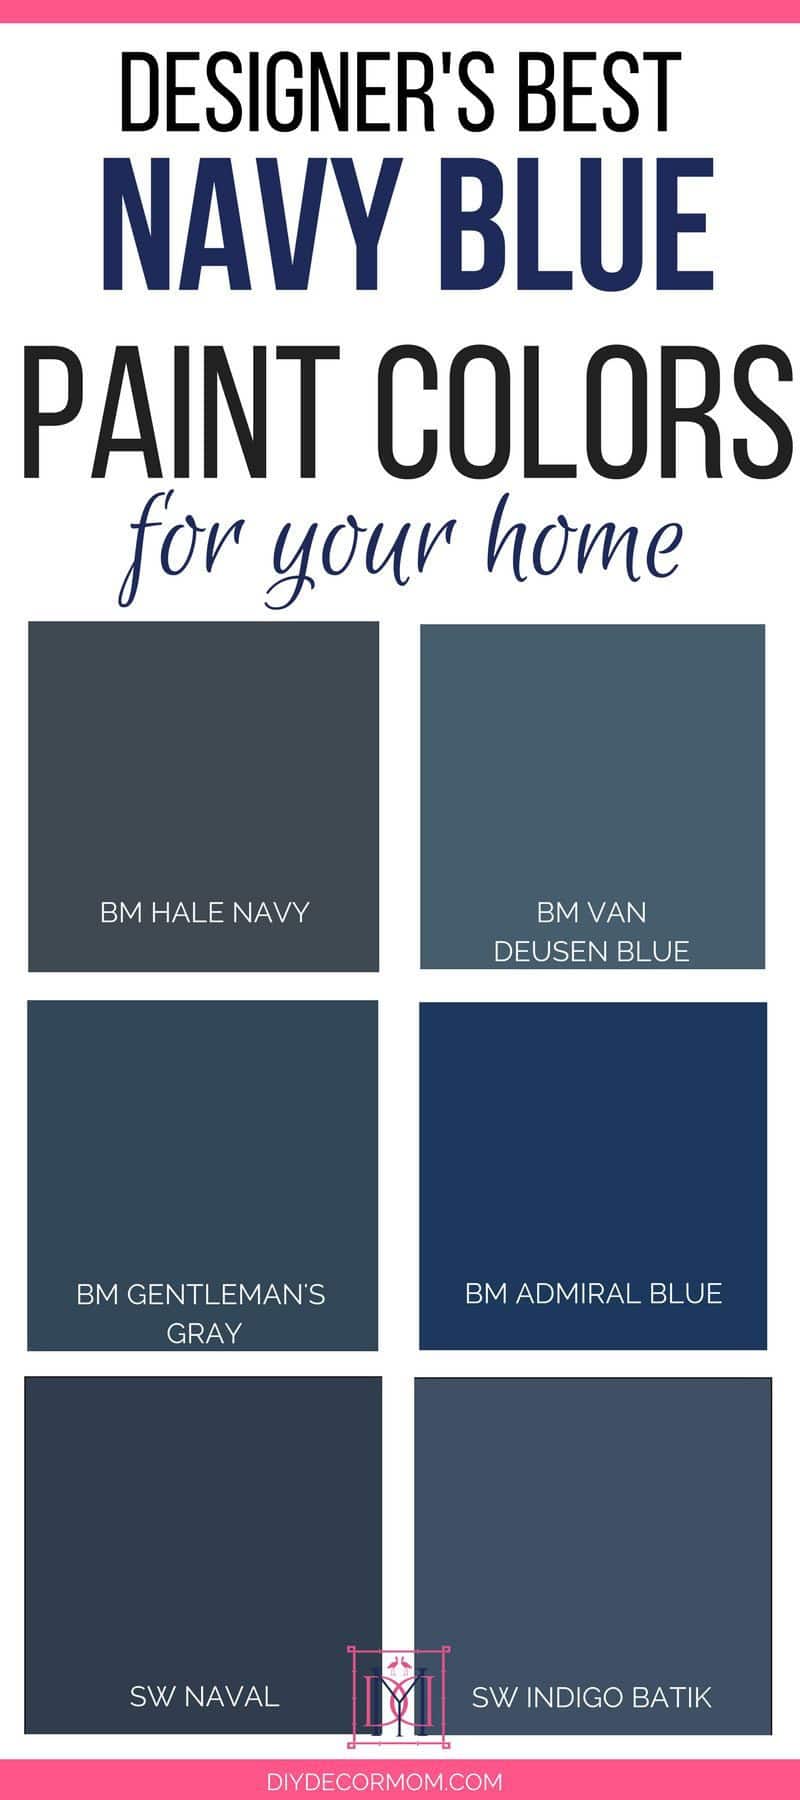 The Best Navy Blue Paint for Your Home